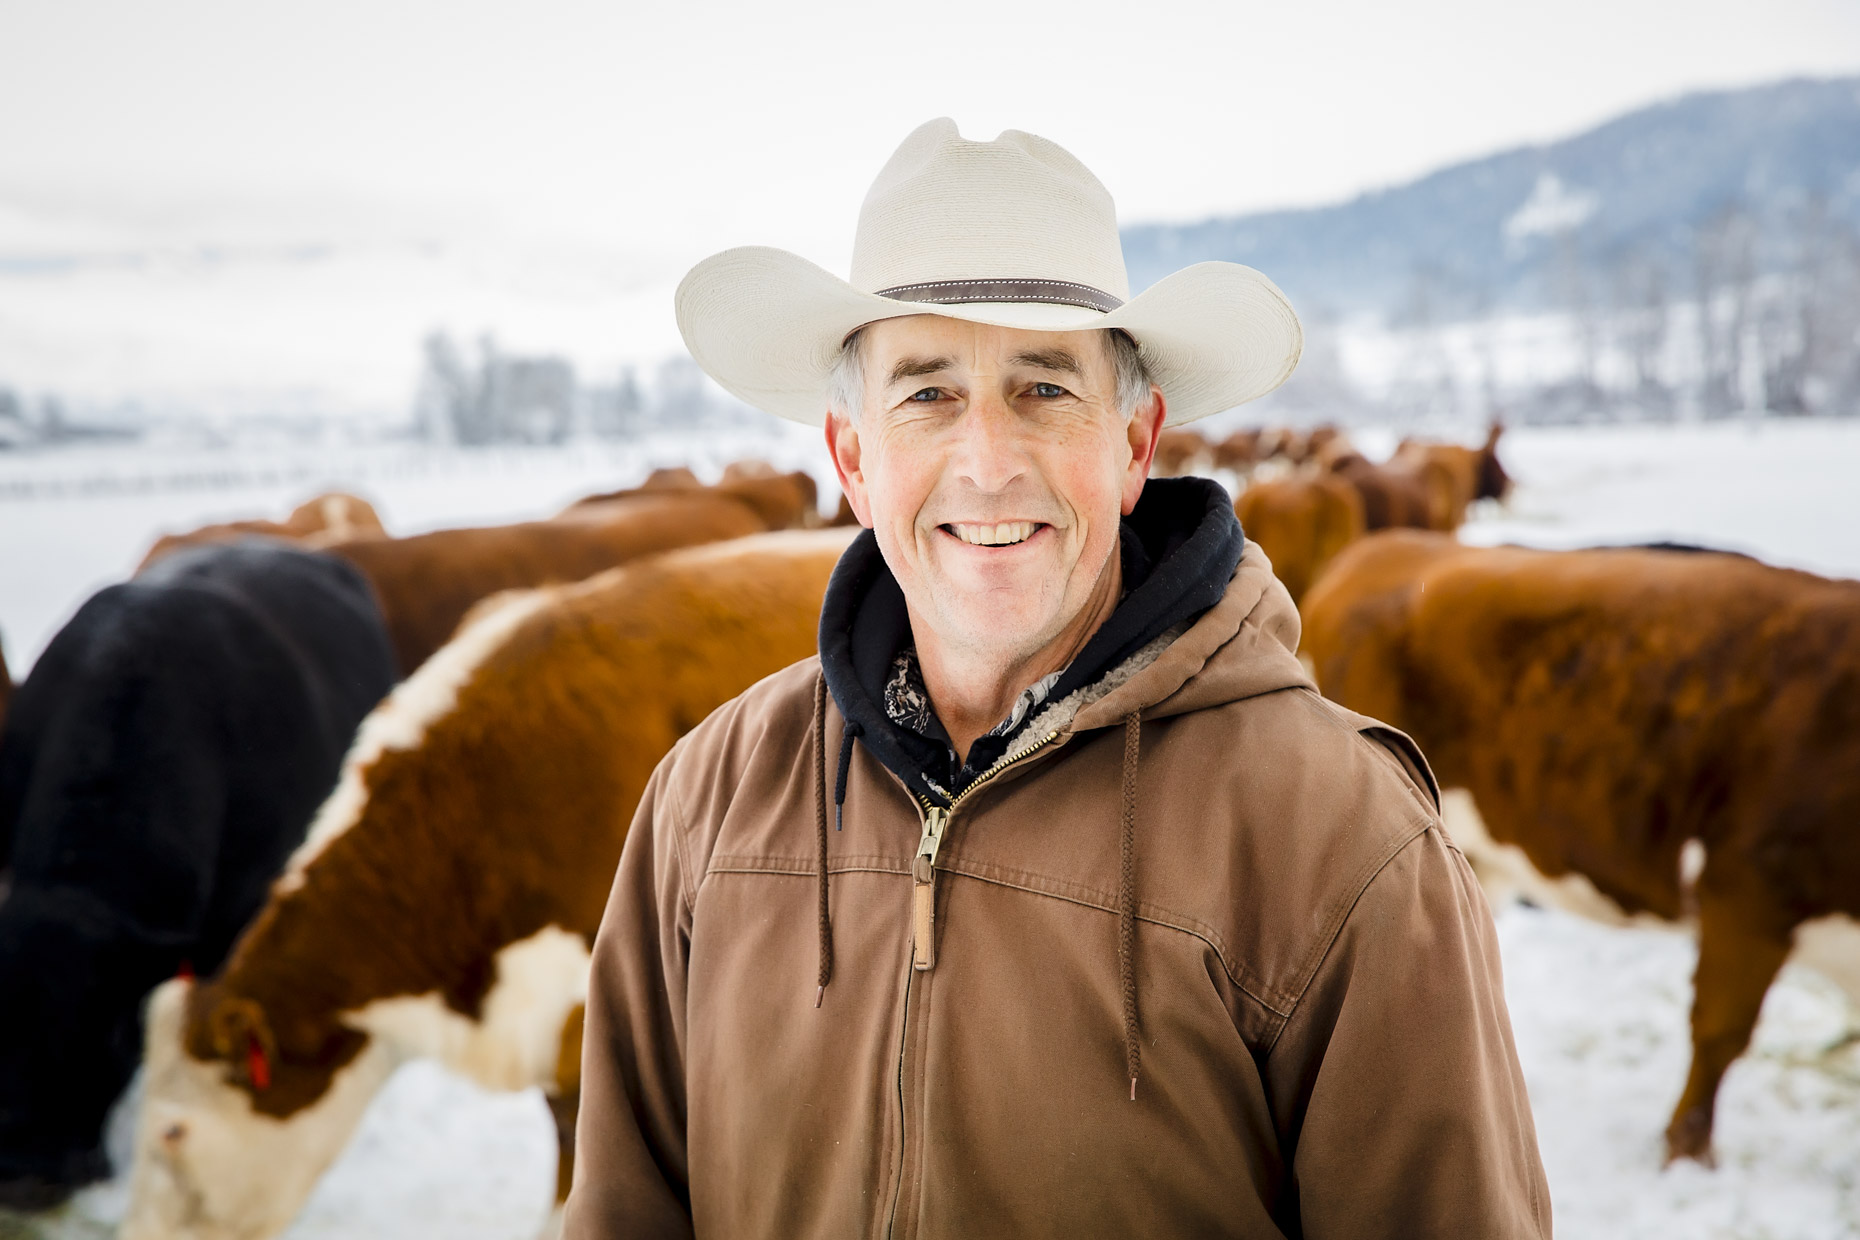 Smiling cowboy in hat surrounded by cows in field in winter